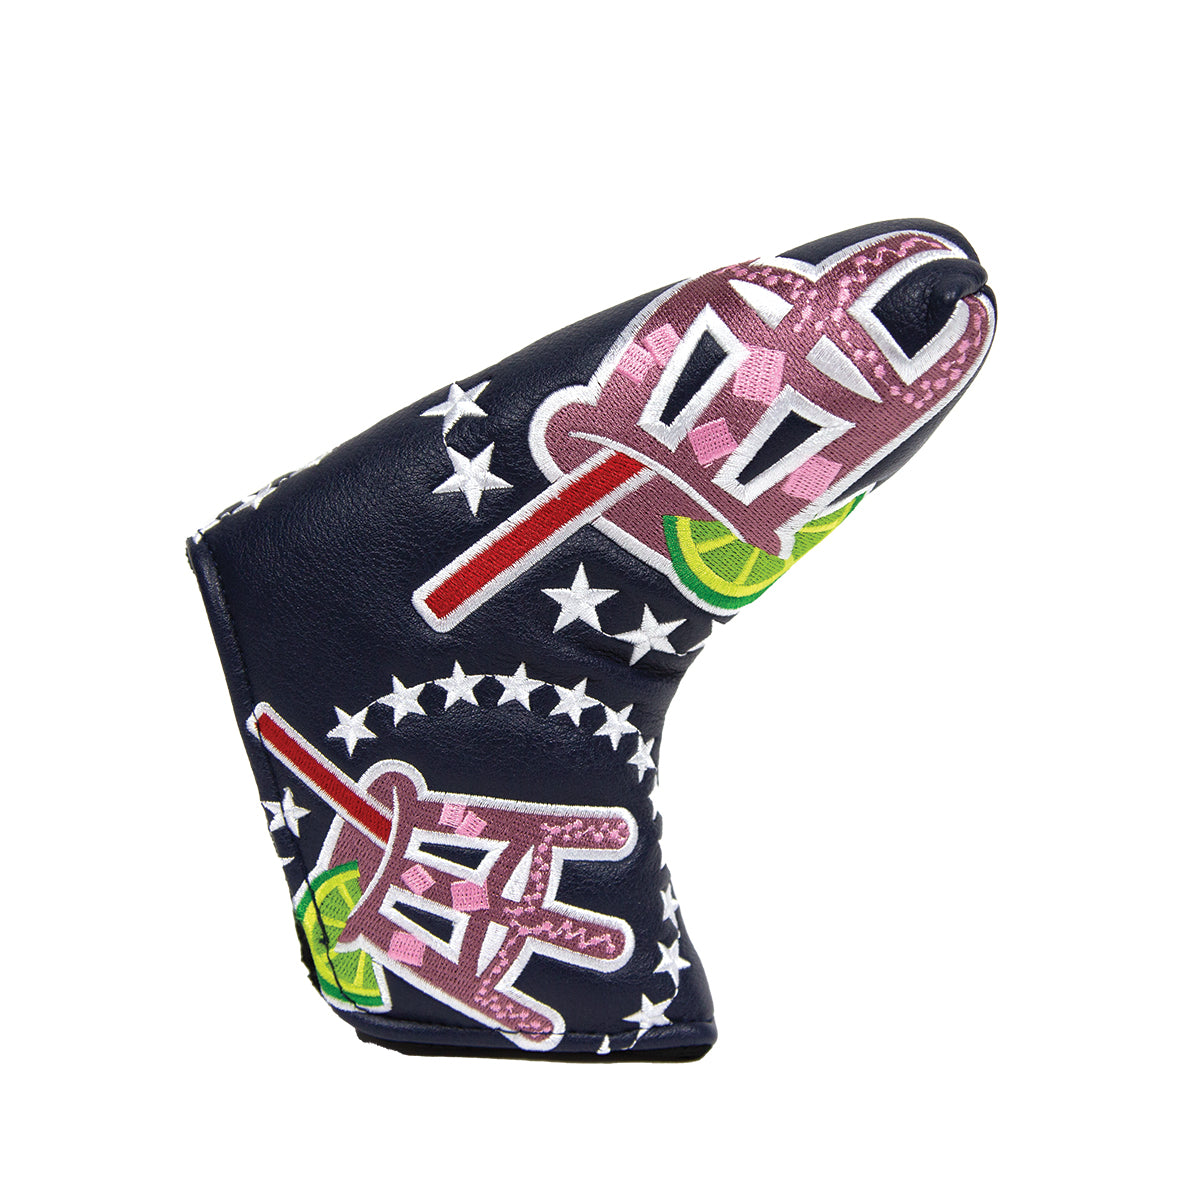 Transfusion Blade Putter Cover II-Golf Accessories-Fore Play-Navy-One Size-Barstool Sports